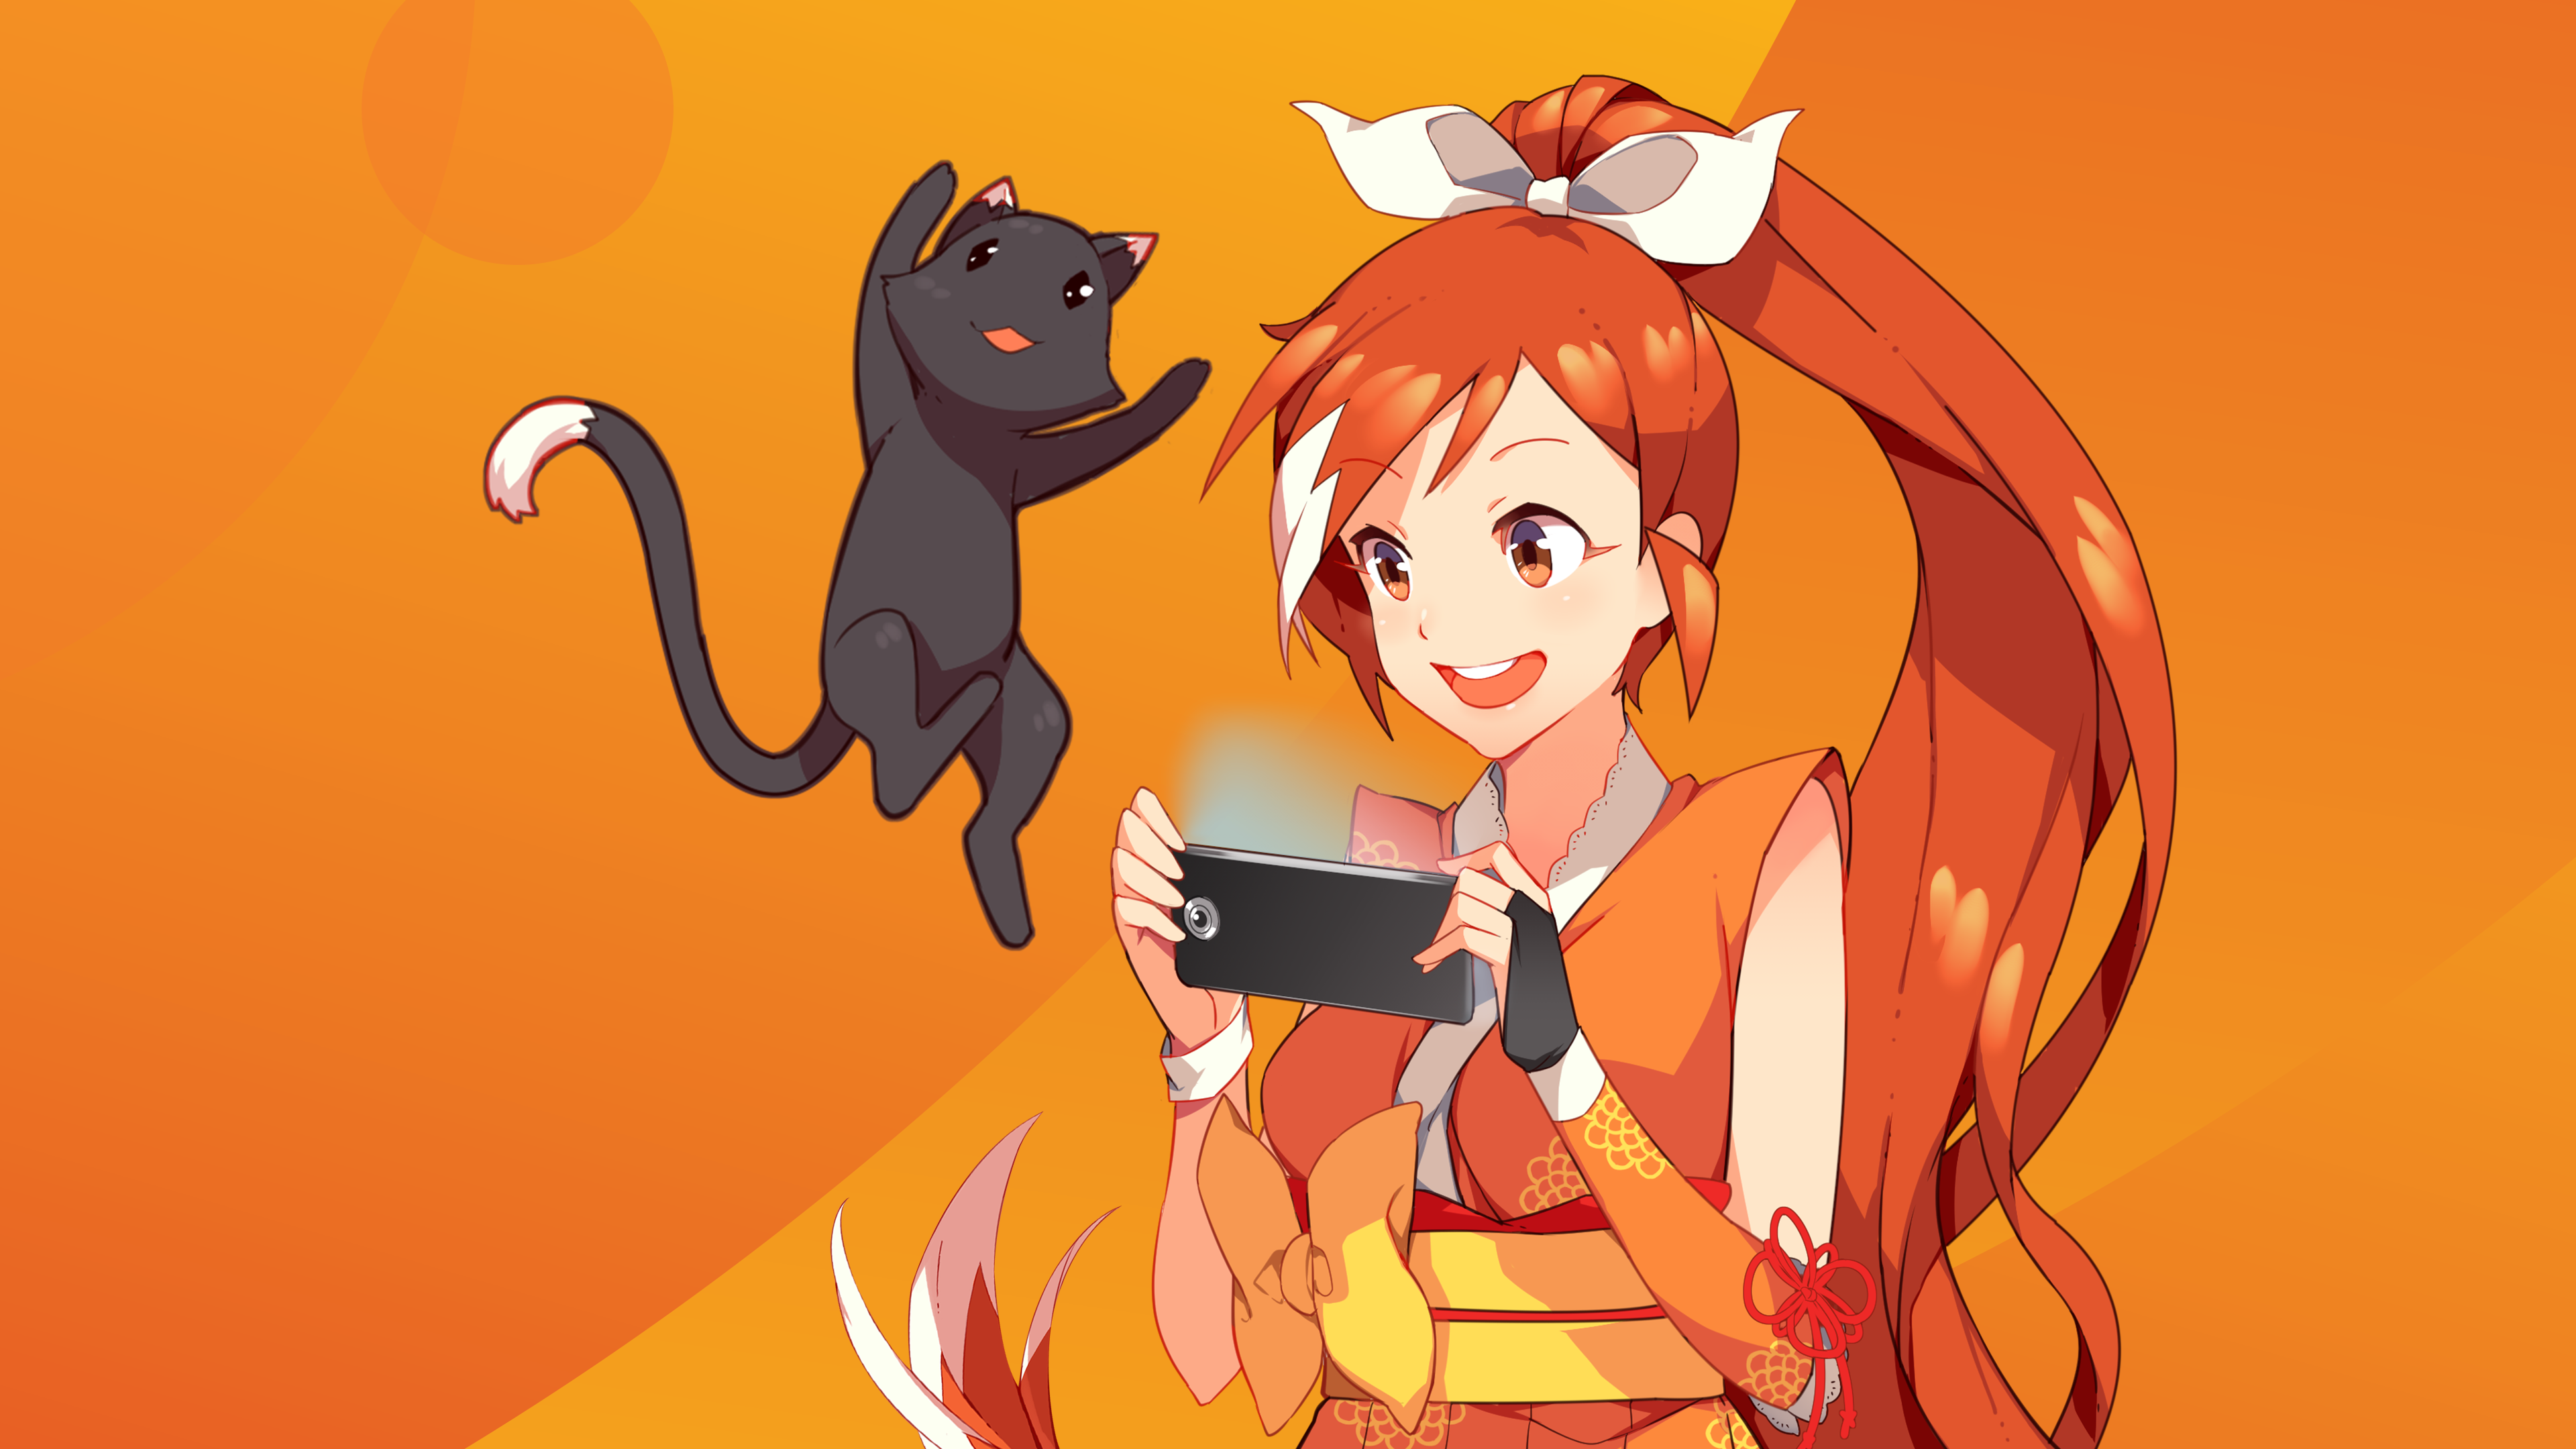 Crunchyroll - Crunchyroll iOS App Lets You Watch Together with SharePlay  Support